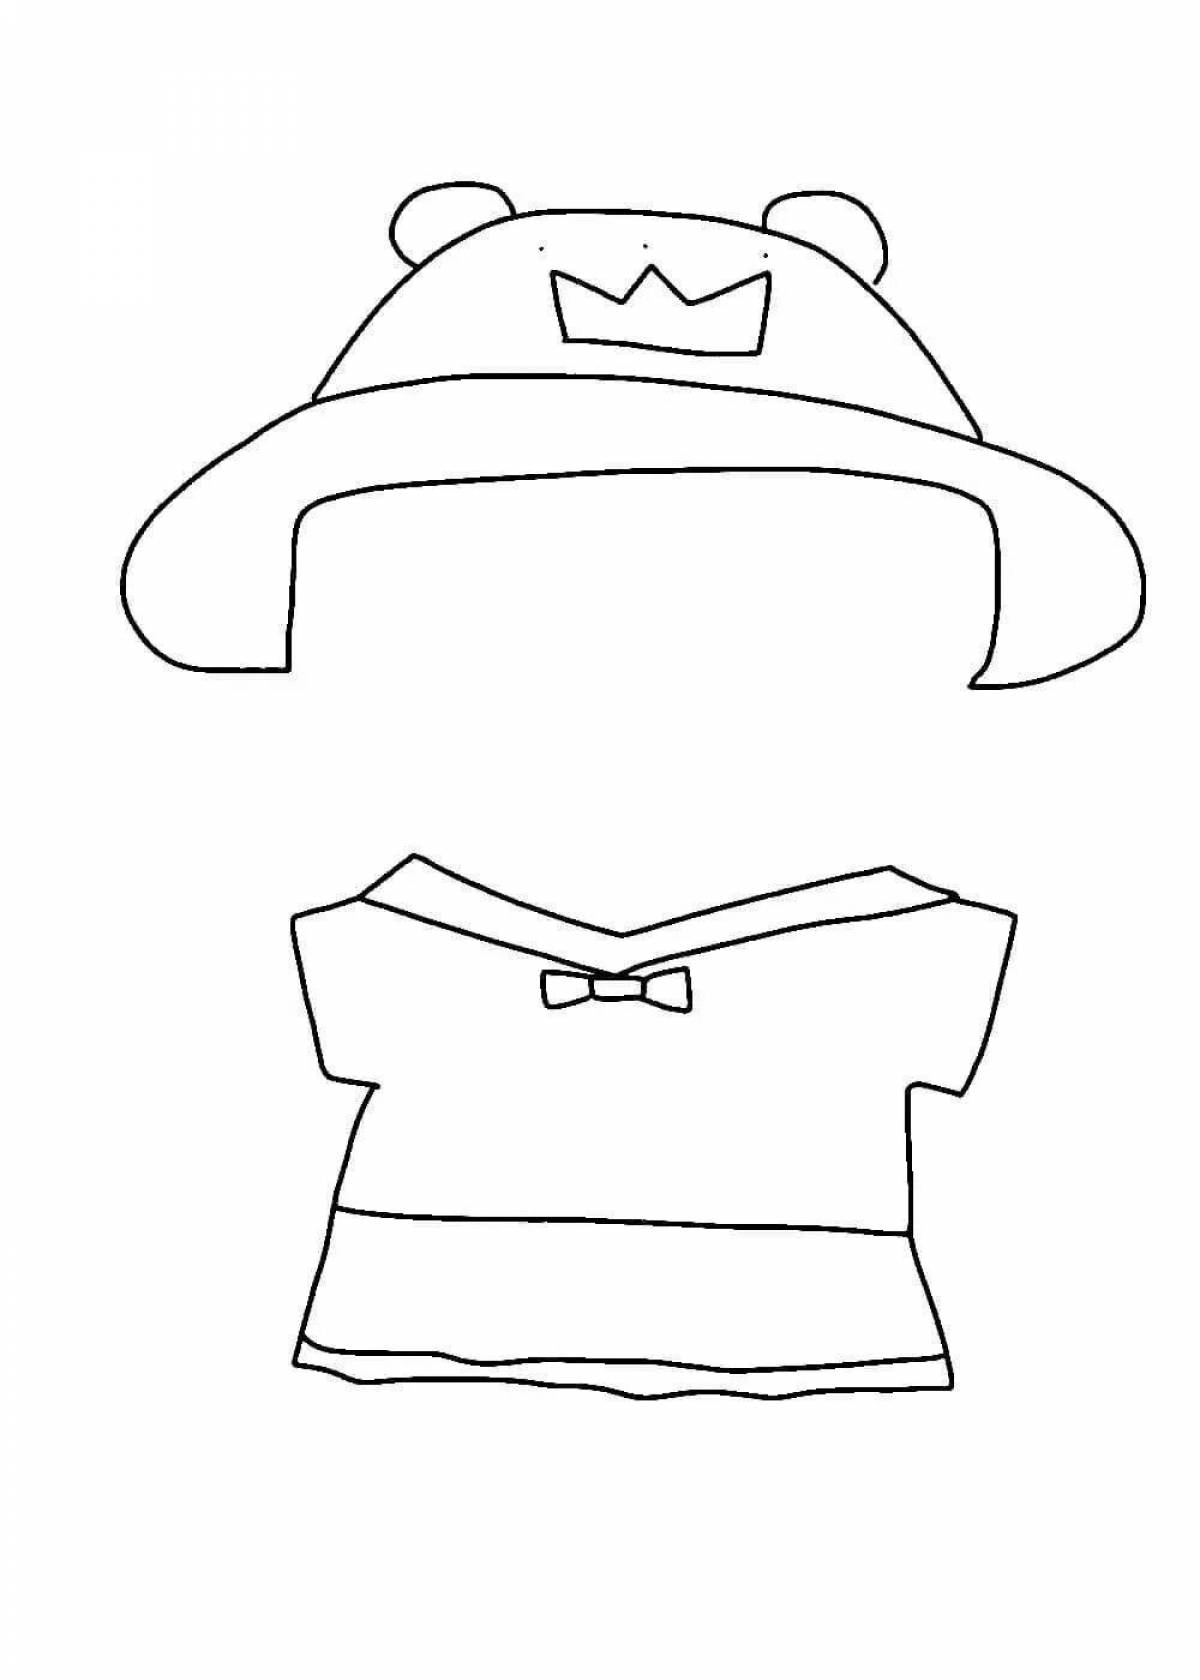 Lalafanfan cute paper duck clothes coloring page